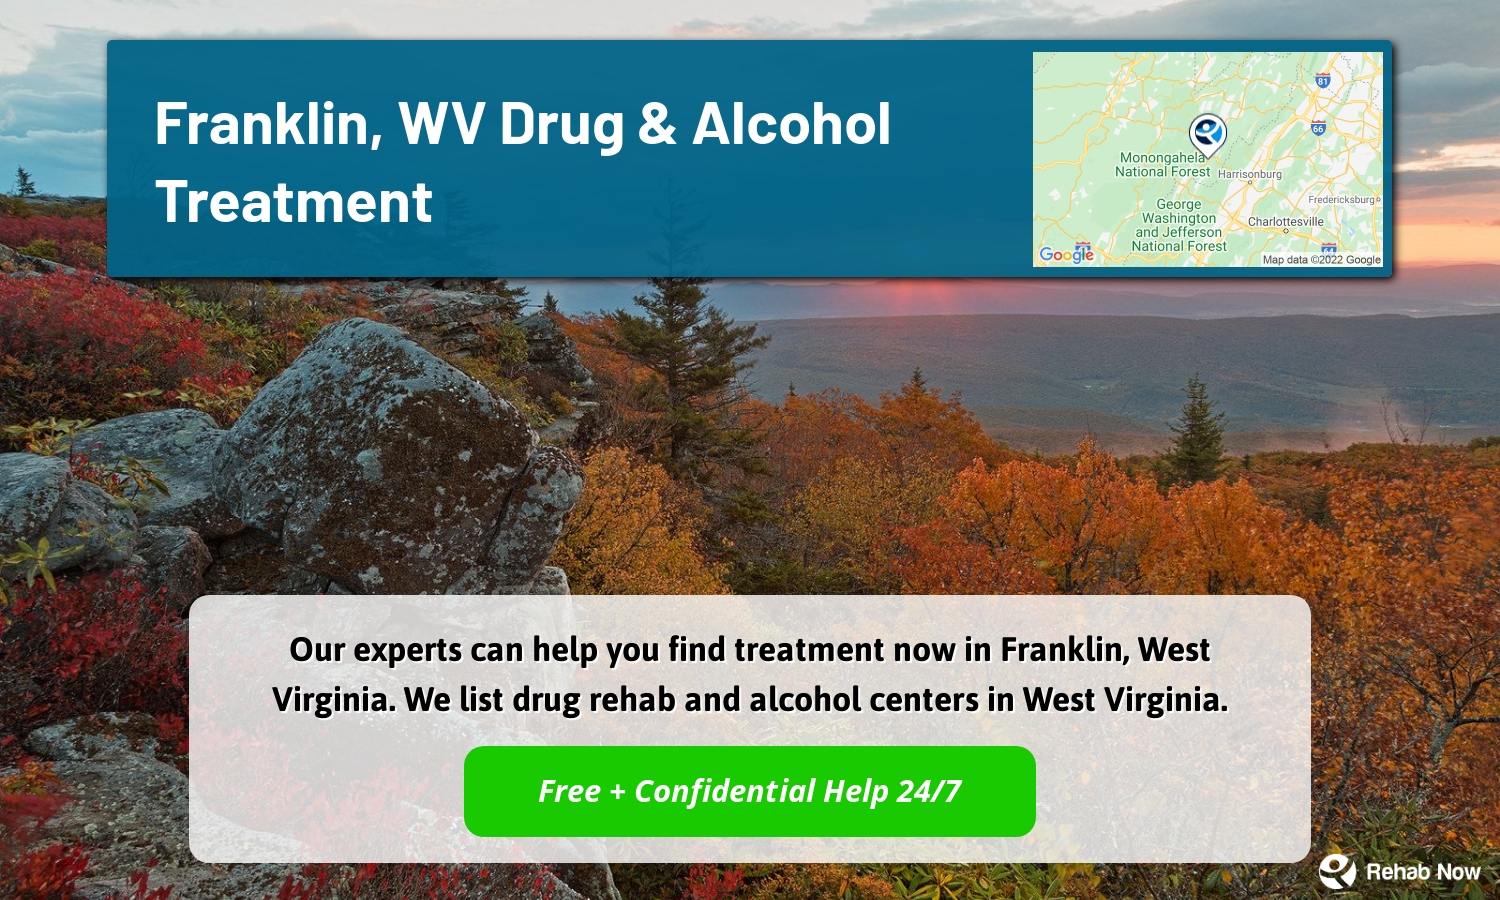 Our experts can help you find treatment now in Franklin, West Virginia. We list drug rehab and alcohol centers in West Virginia.